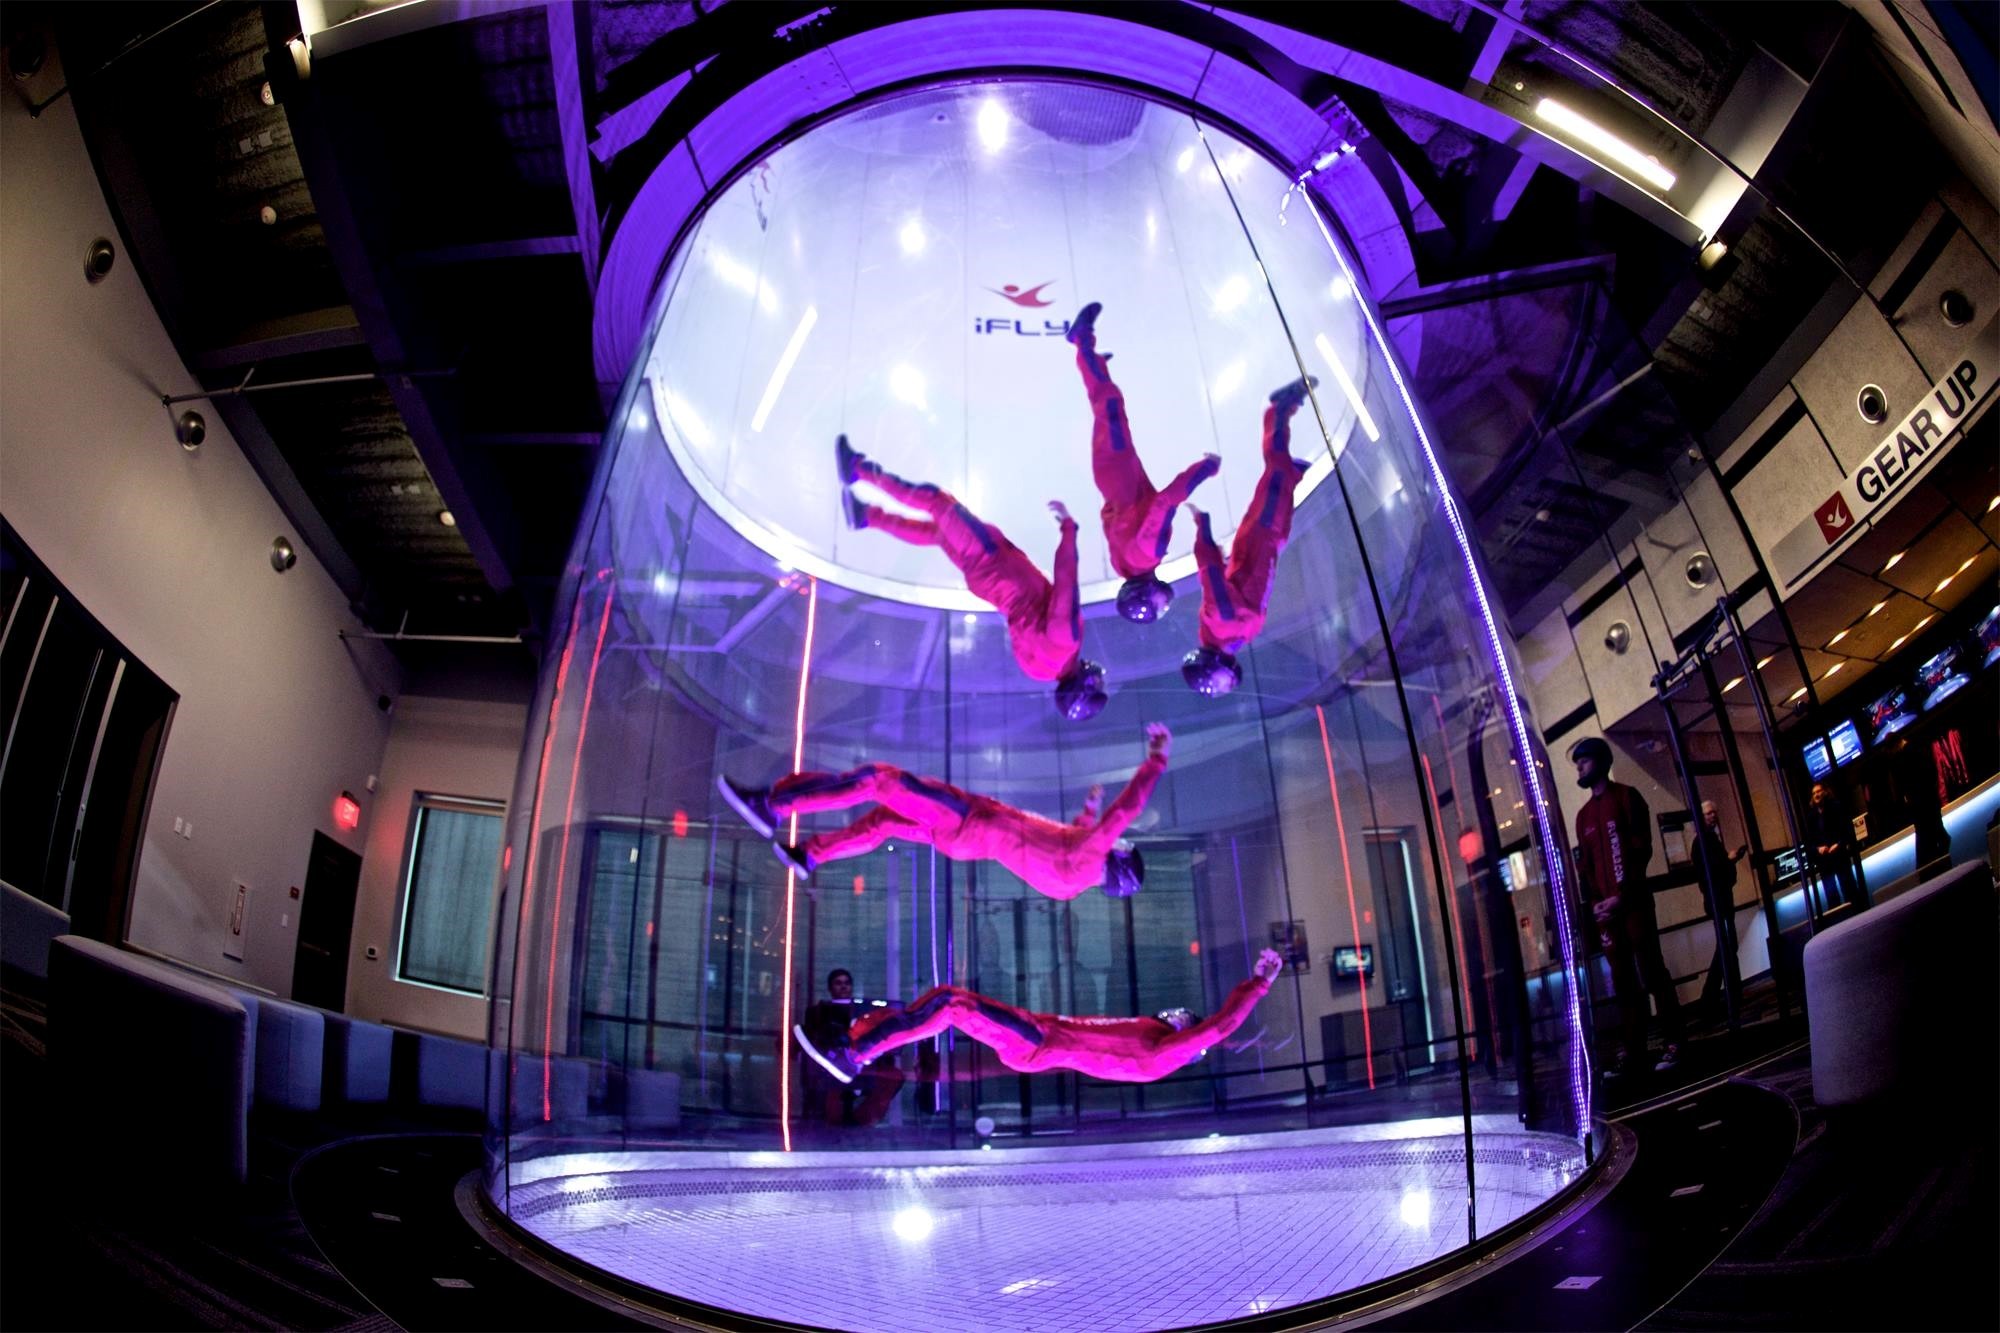 iFly Dubai Indoor Skydive Experience - Getaways Travel and Tourism